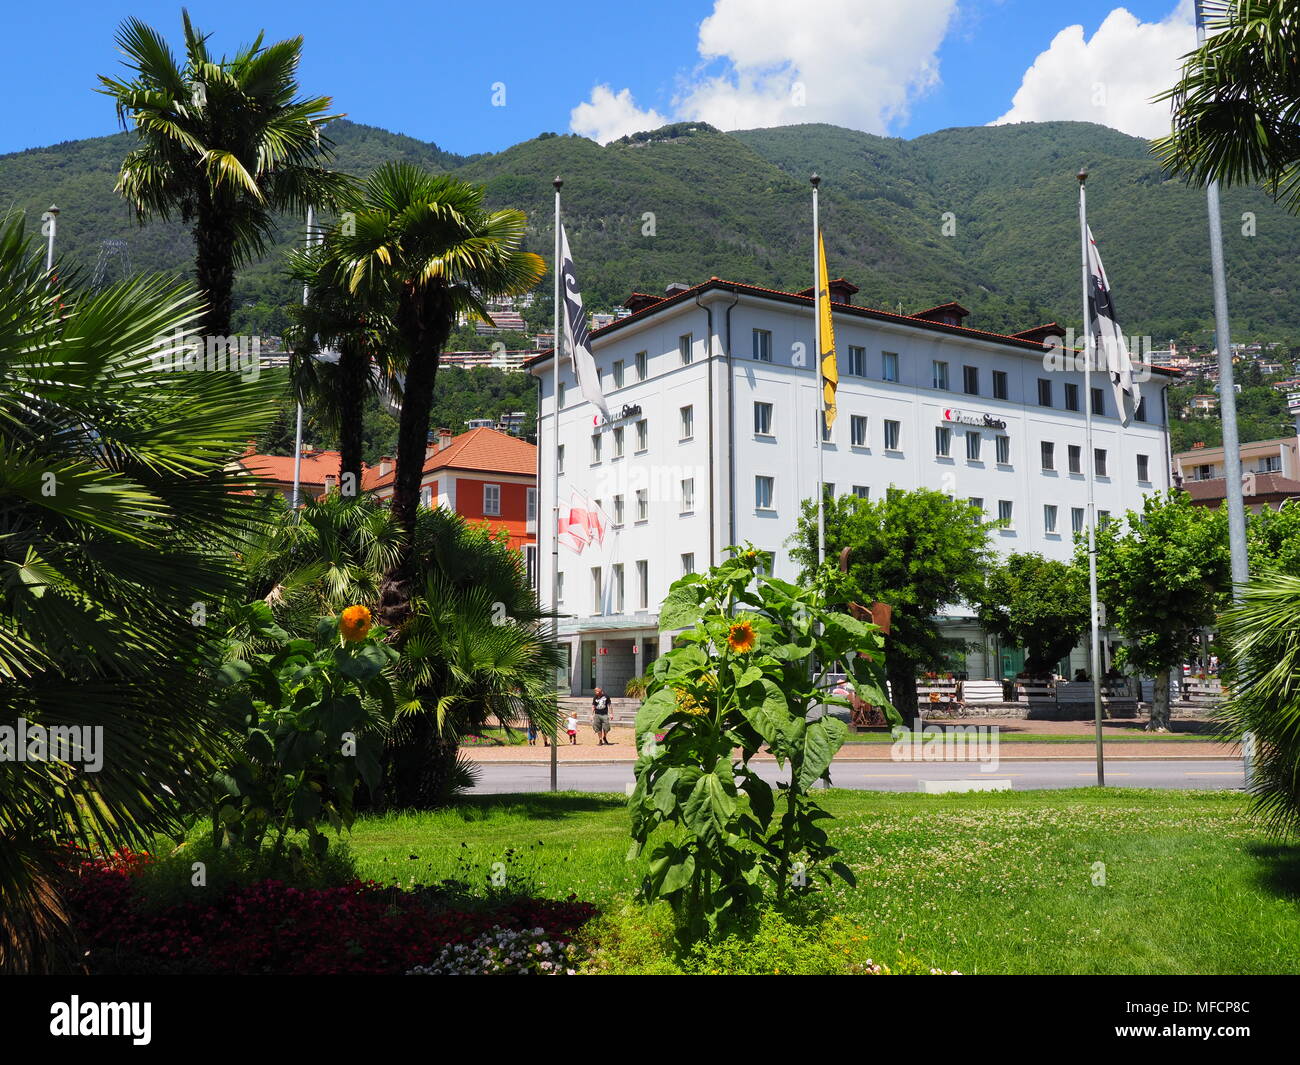 LOCARNO, SWITZERLAND on JULY 2017: Tropical palms in park with flags on  mast at square and colorful buildings in european city center at canton of  Tic Stock Photo - Alamy